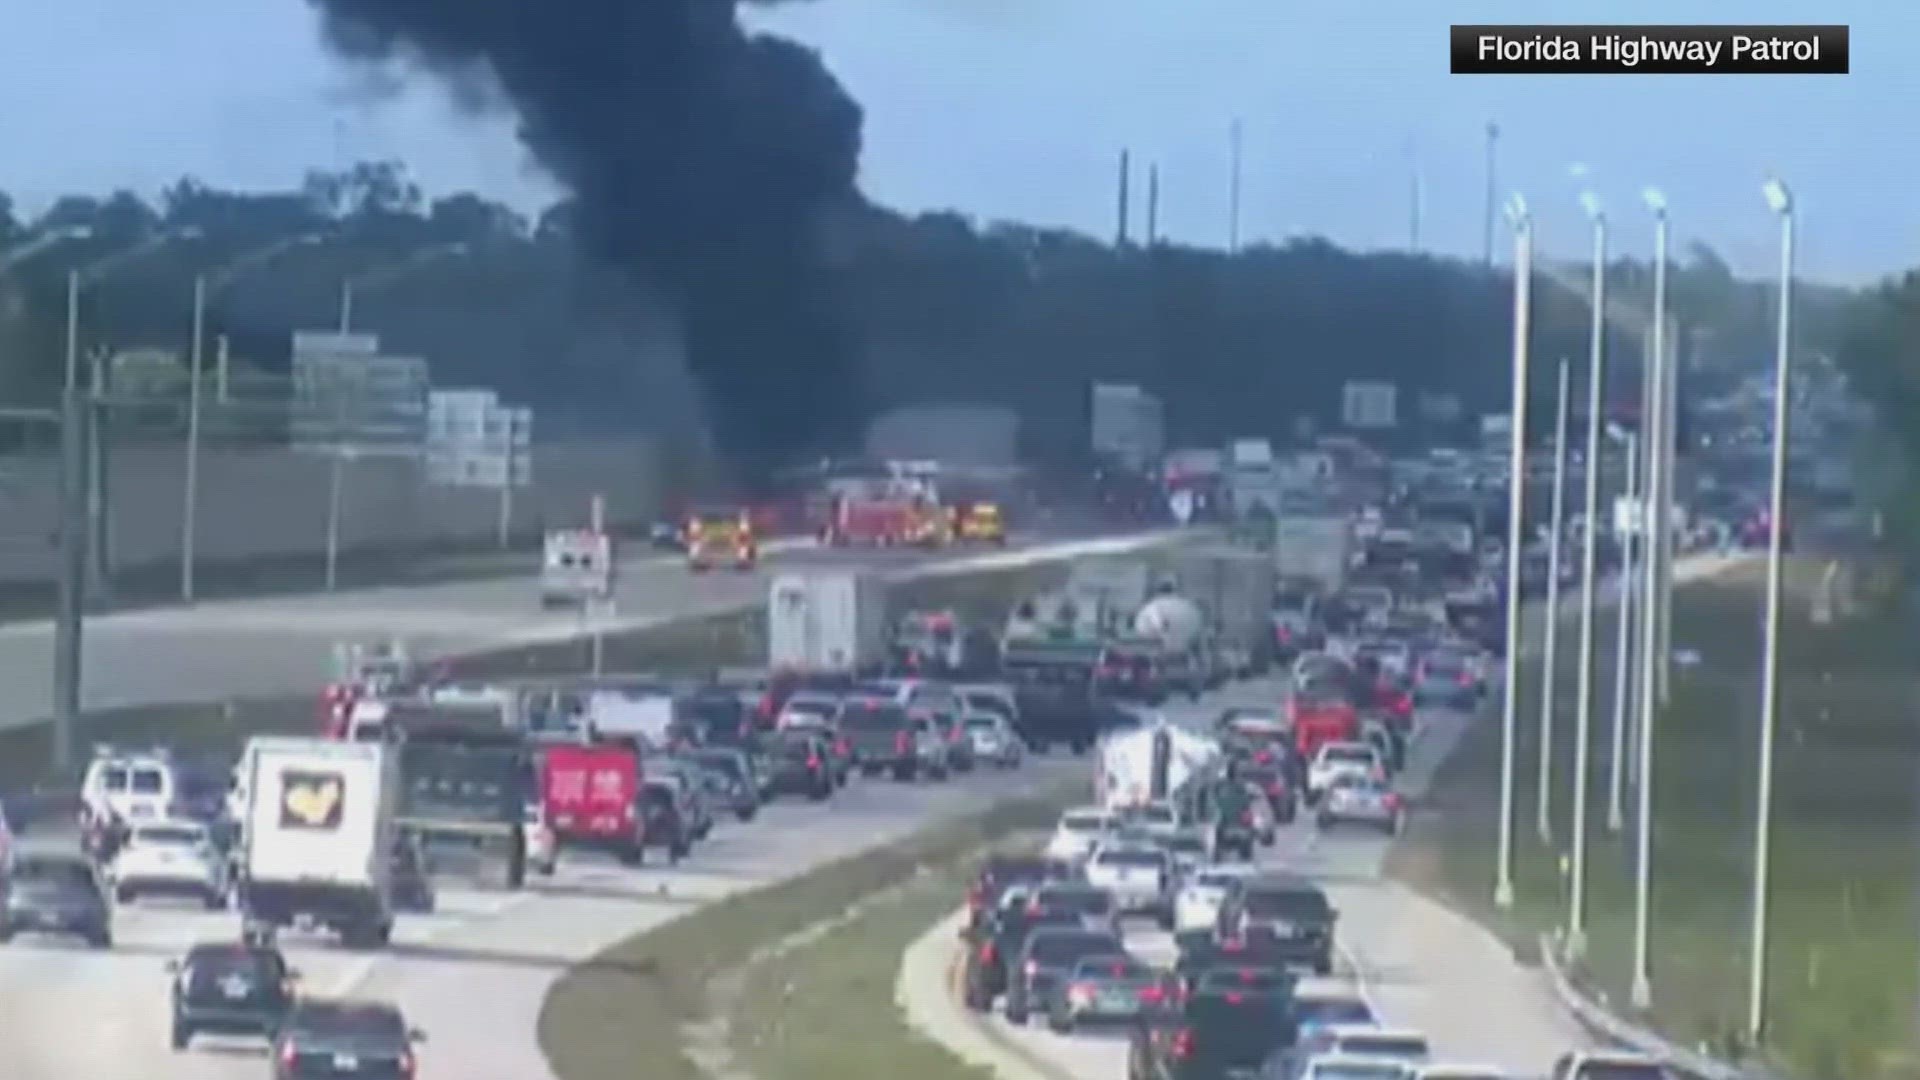 Moments before the deadly crash of a charter jet on a Florida highway, three warnings about oil pressure problems in its two engines sounded.